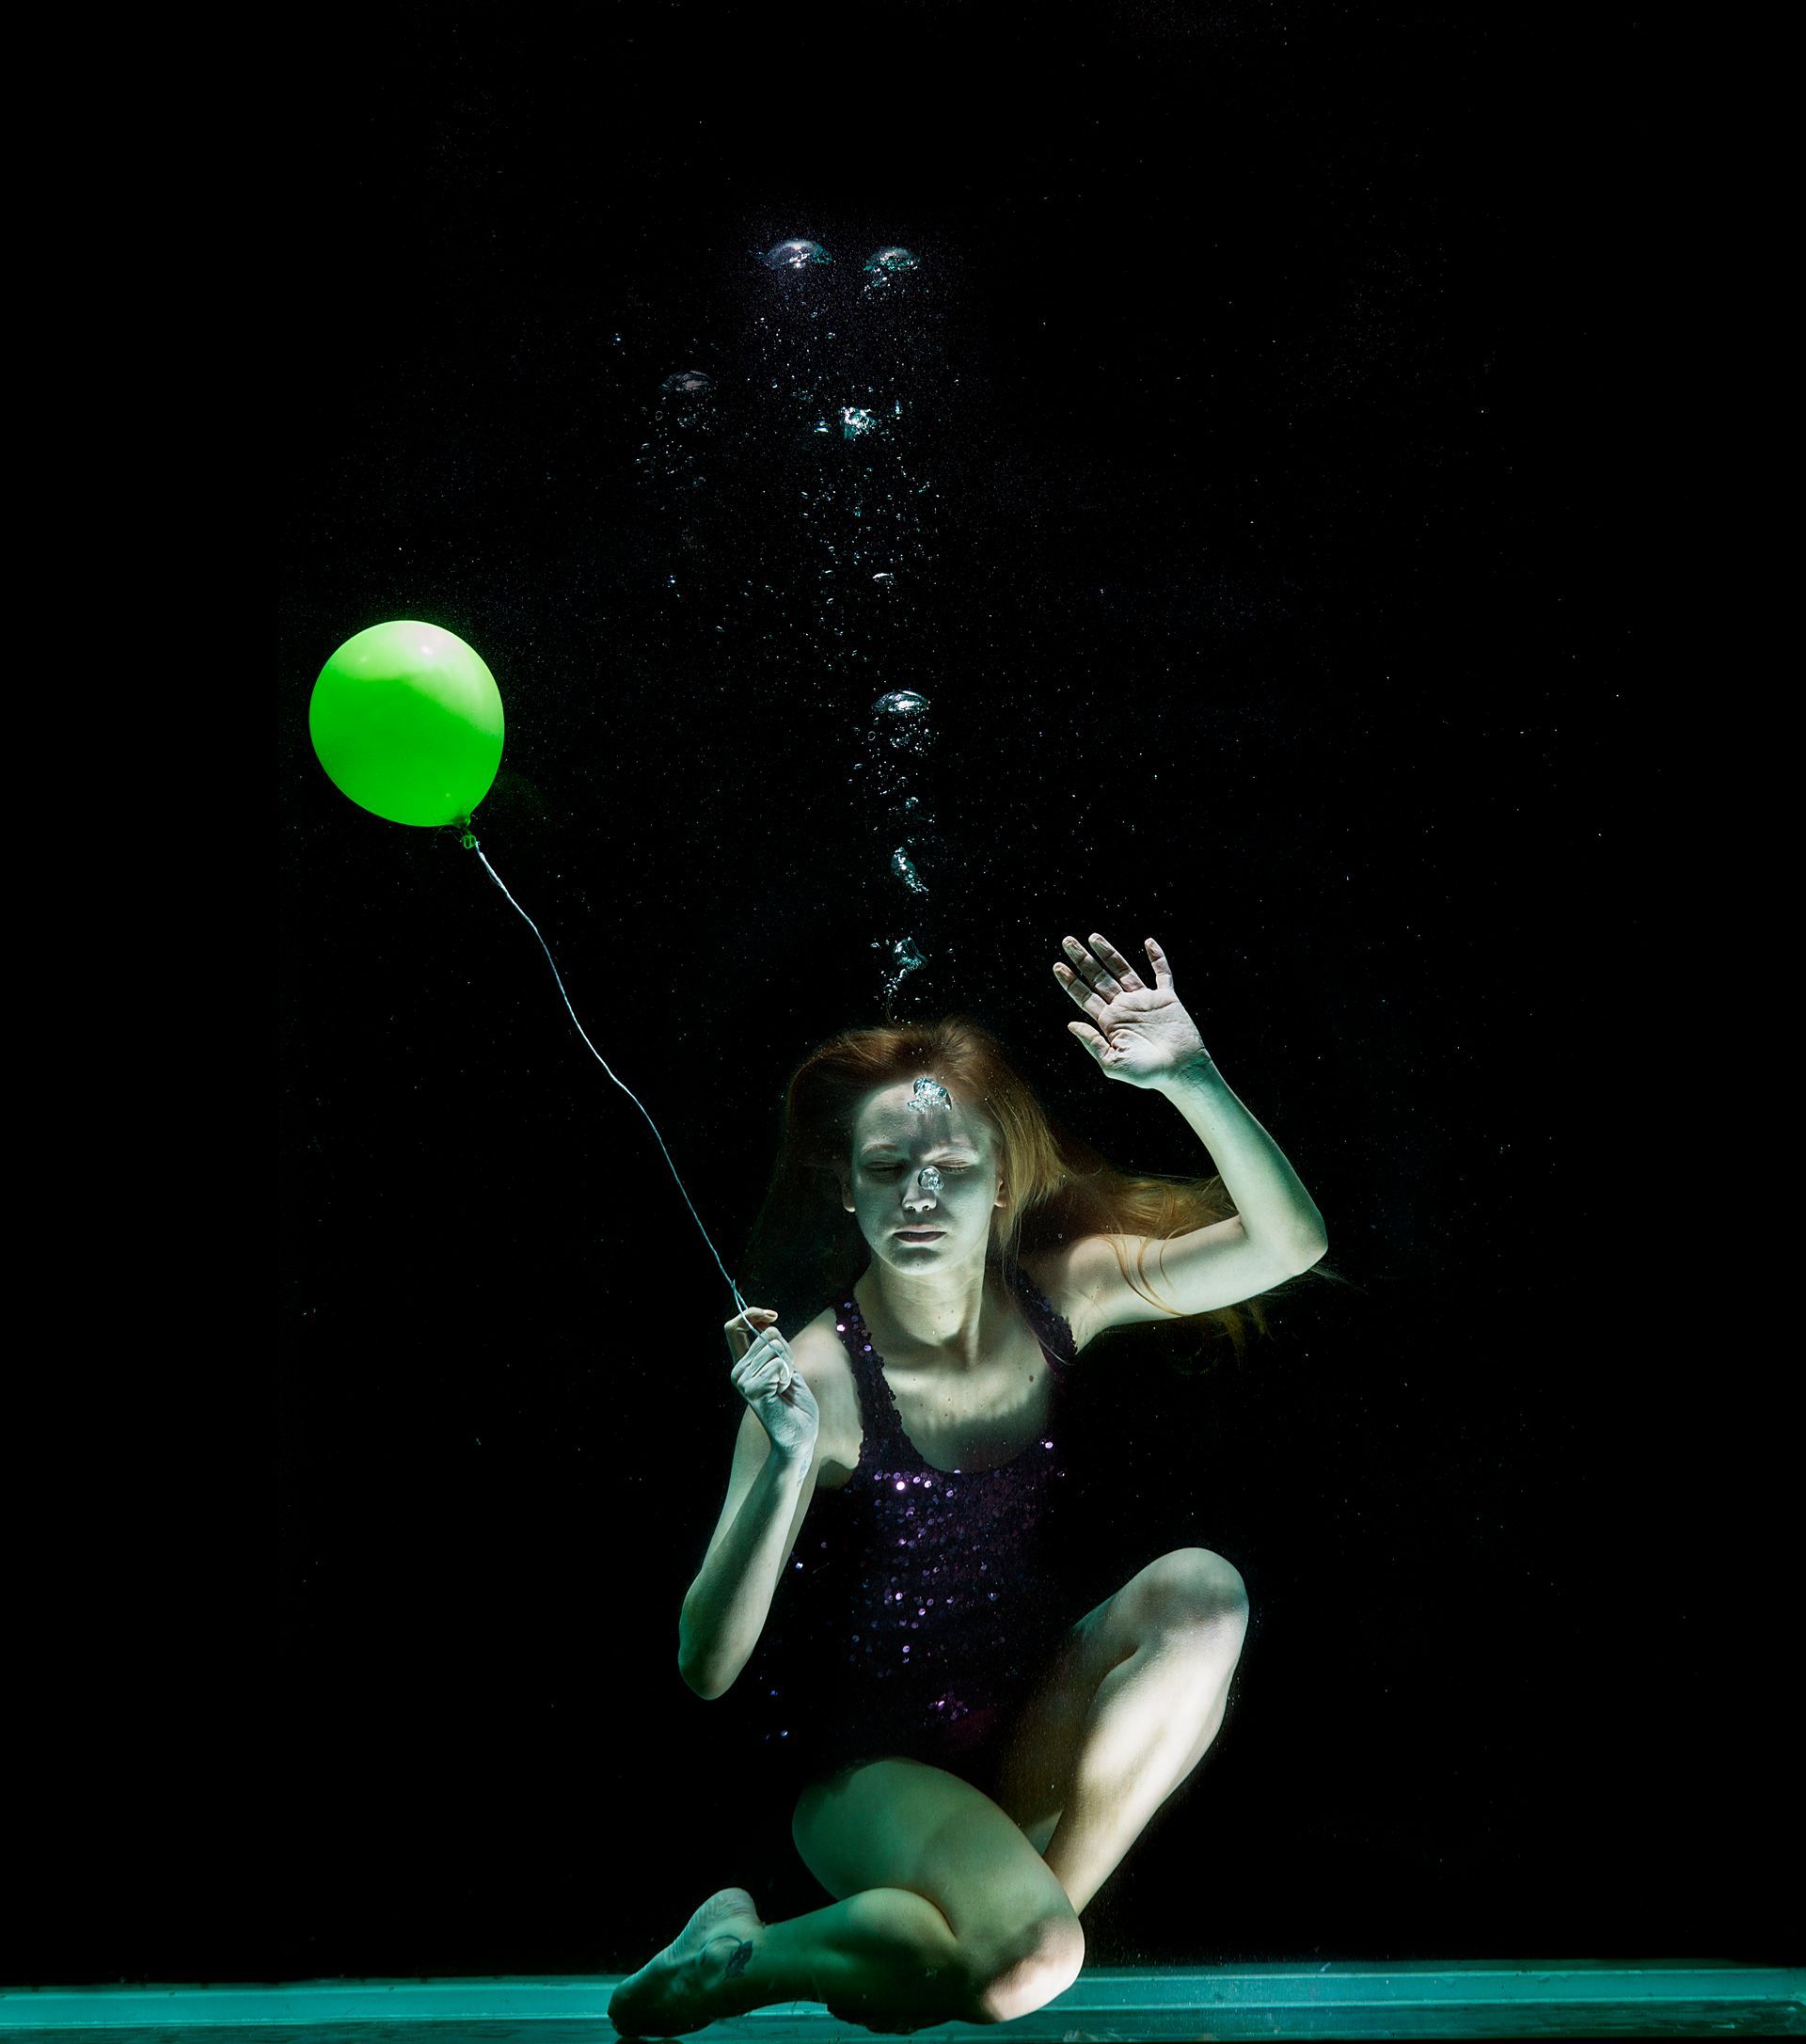 Girl underwater blowing bubbles of breath, holding a balloon